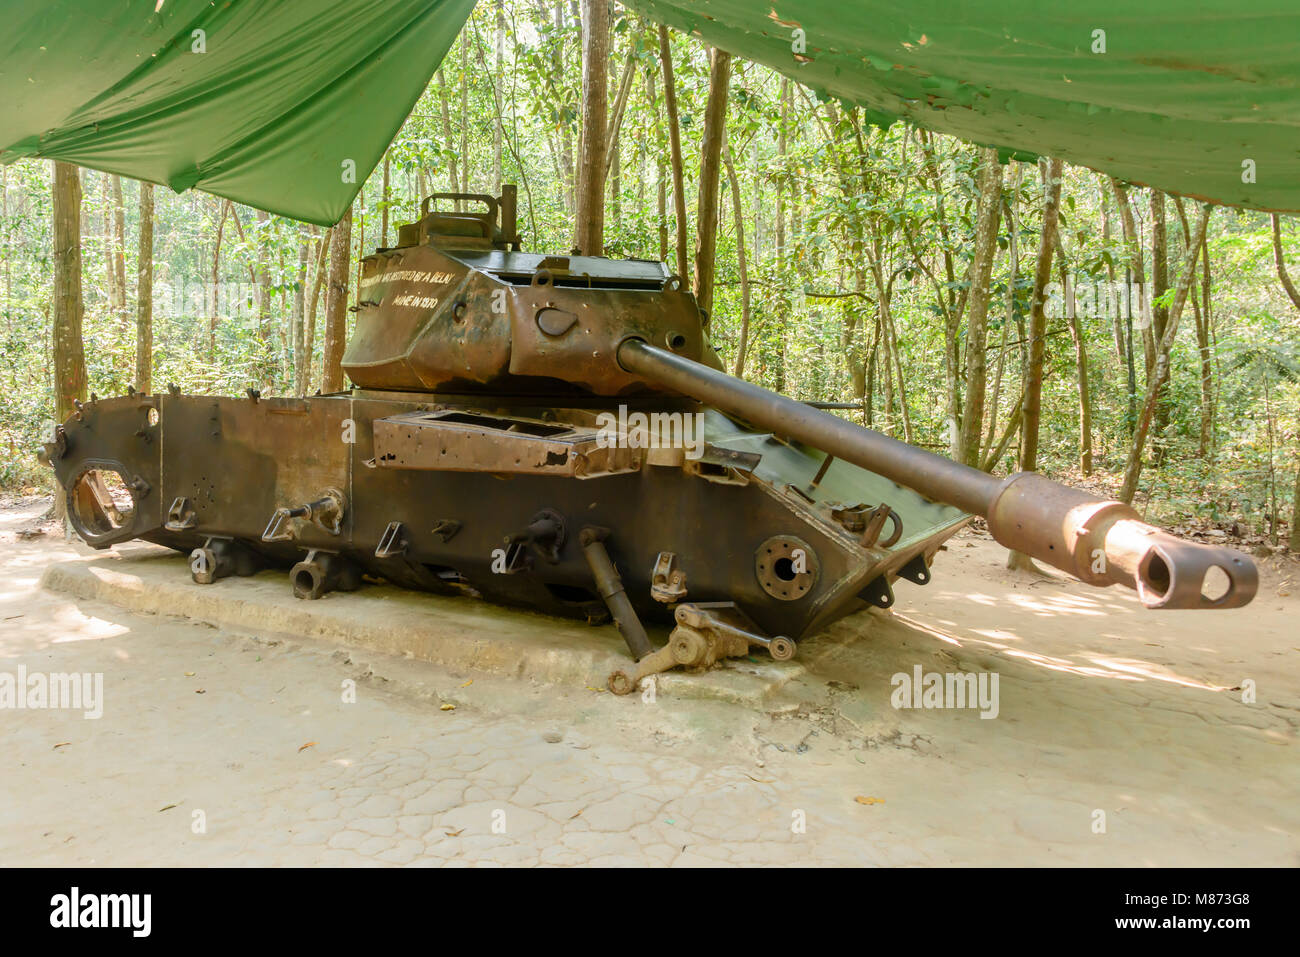 American M41 tank which was destroyed by a Viet Cong delay action mine in 1970.  It has remained in situ ever since.  Cu Chi Tunnels, Vietnam. Stock Photo